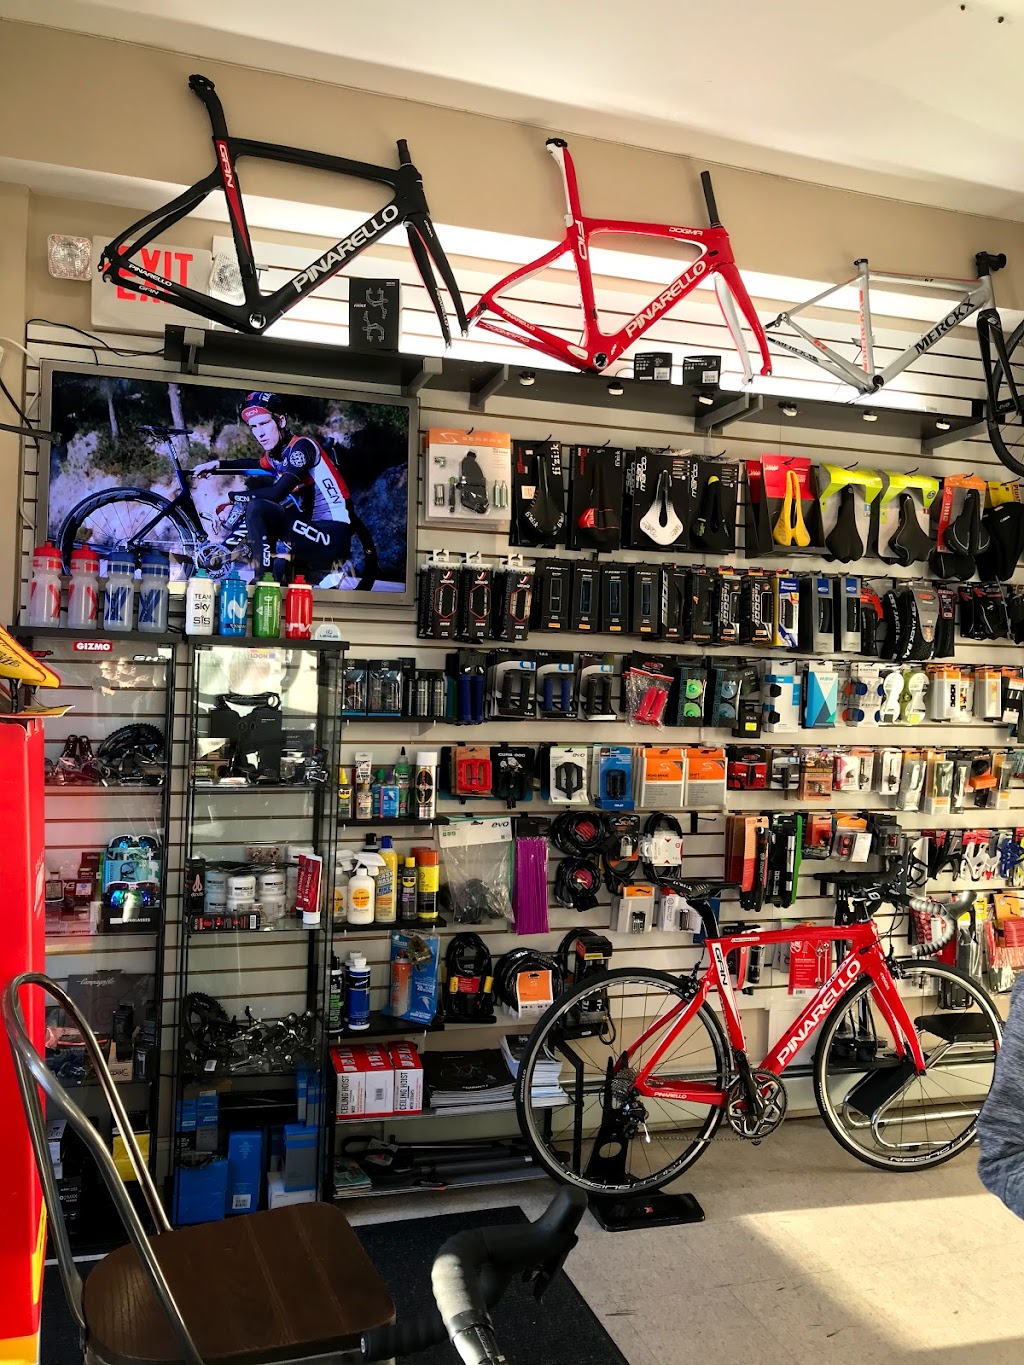 Pedro Sanchez Cycling Bicycle Store in New Rochelle | 52 Drake Ave, New Rochelle, NY 10805 | Phone: (914) 365-1600